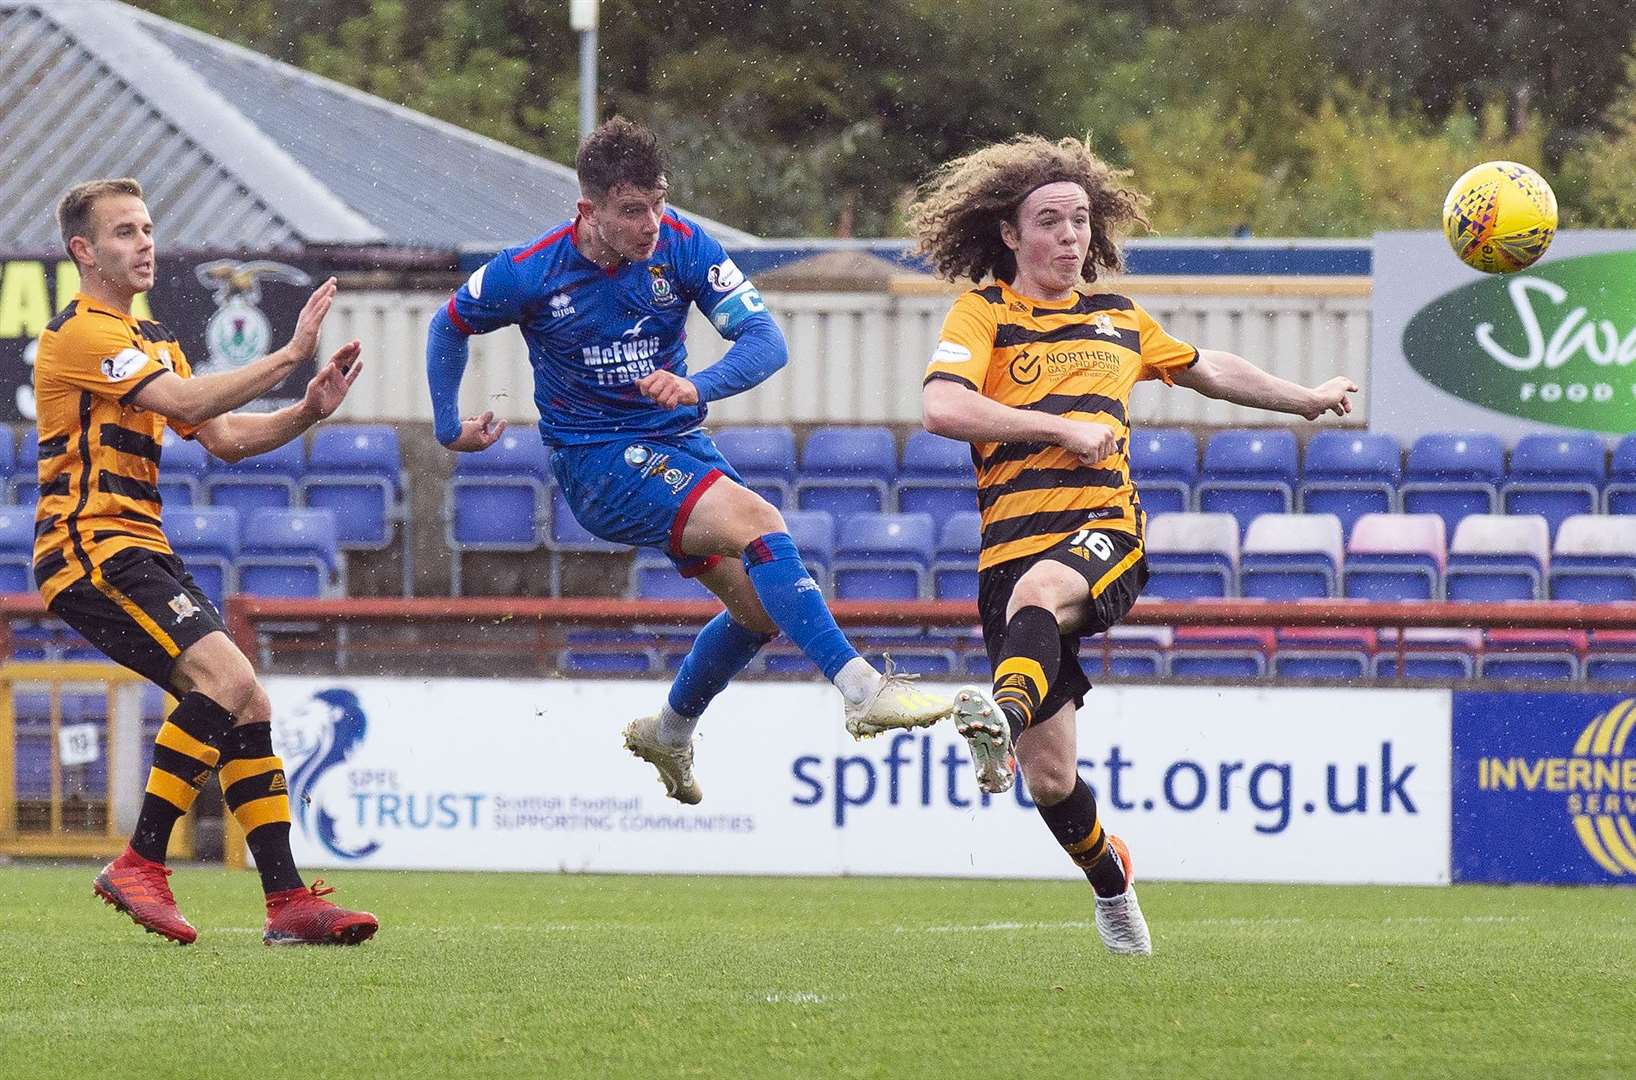 Picture - Ken Macpherson, Inverness. Scottish Challenge Cup 4th Round. Inverness CT(3) v Alloa(0). 12.10.19. ICT's Aaron Doran gets to the ball ahead of Alloa's Nathan Gilhooley to volley for goal.